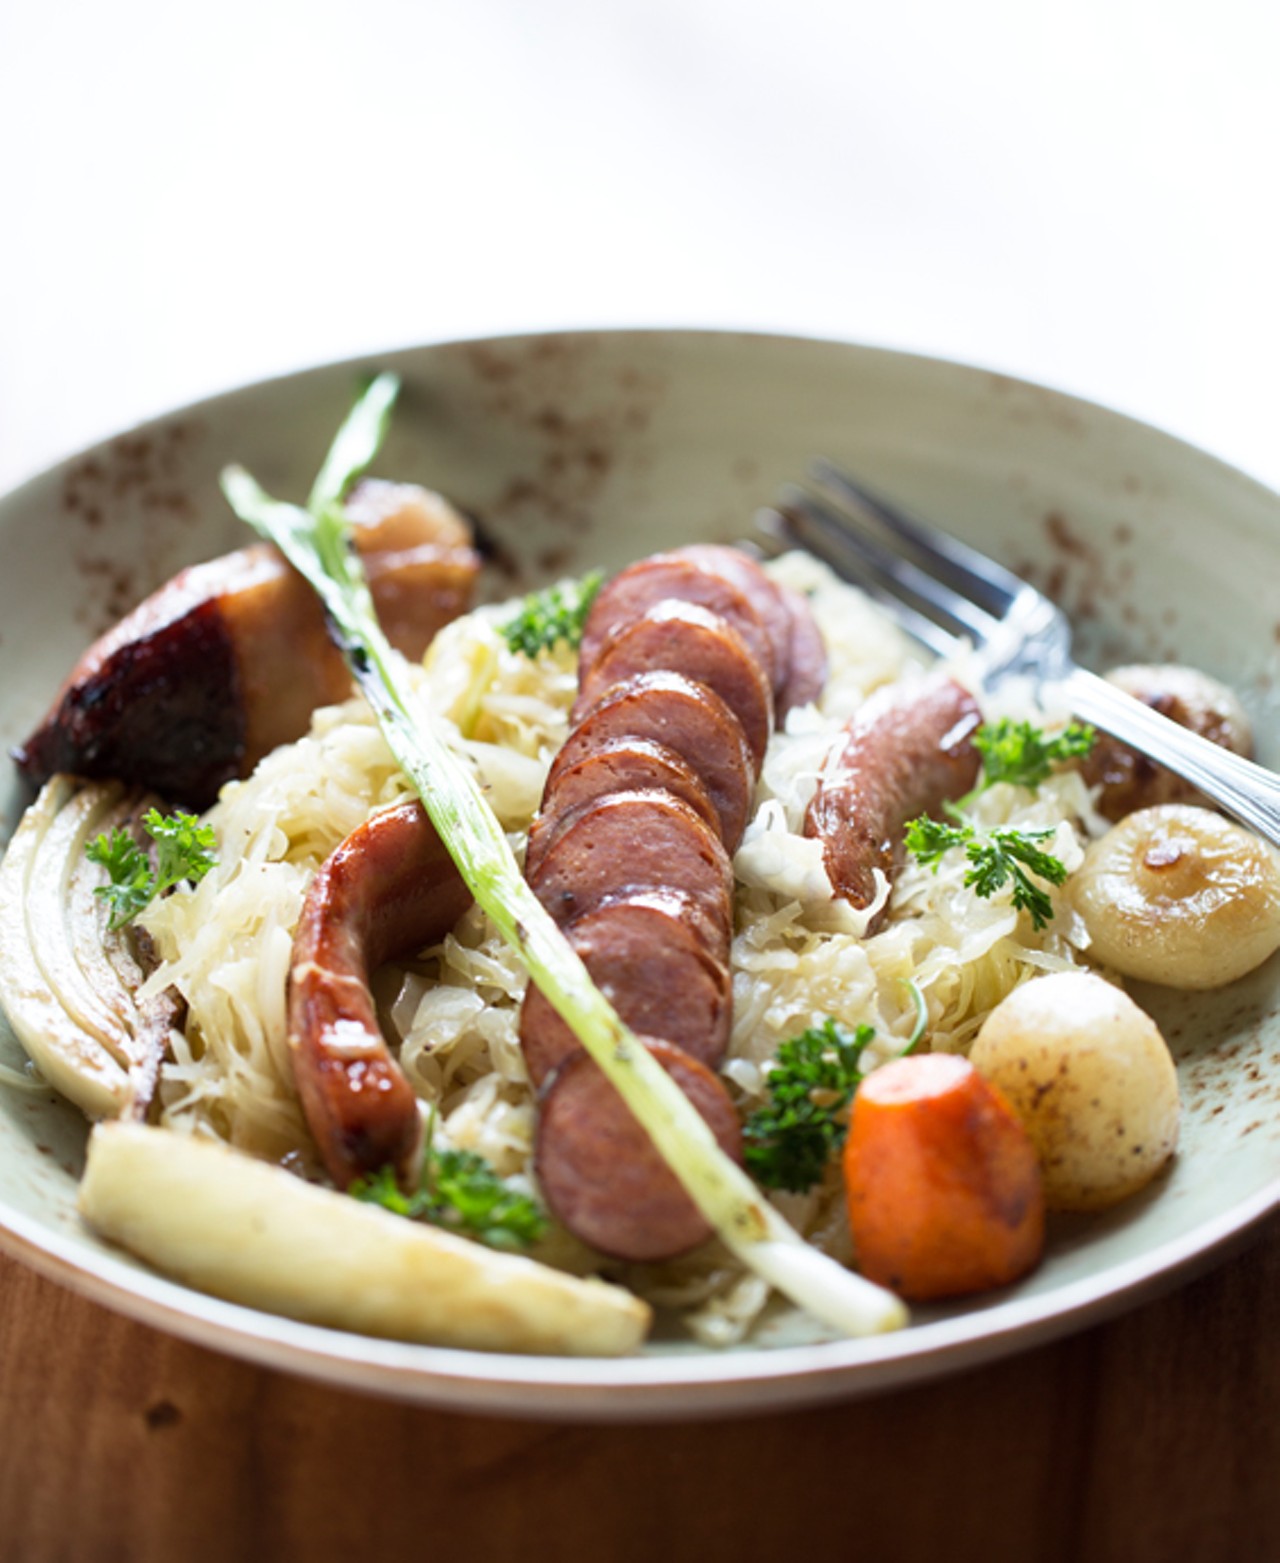 Choucroute Garnie: house sausages and smoked pork.